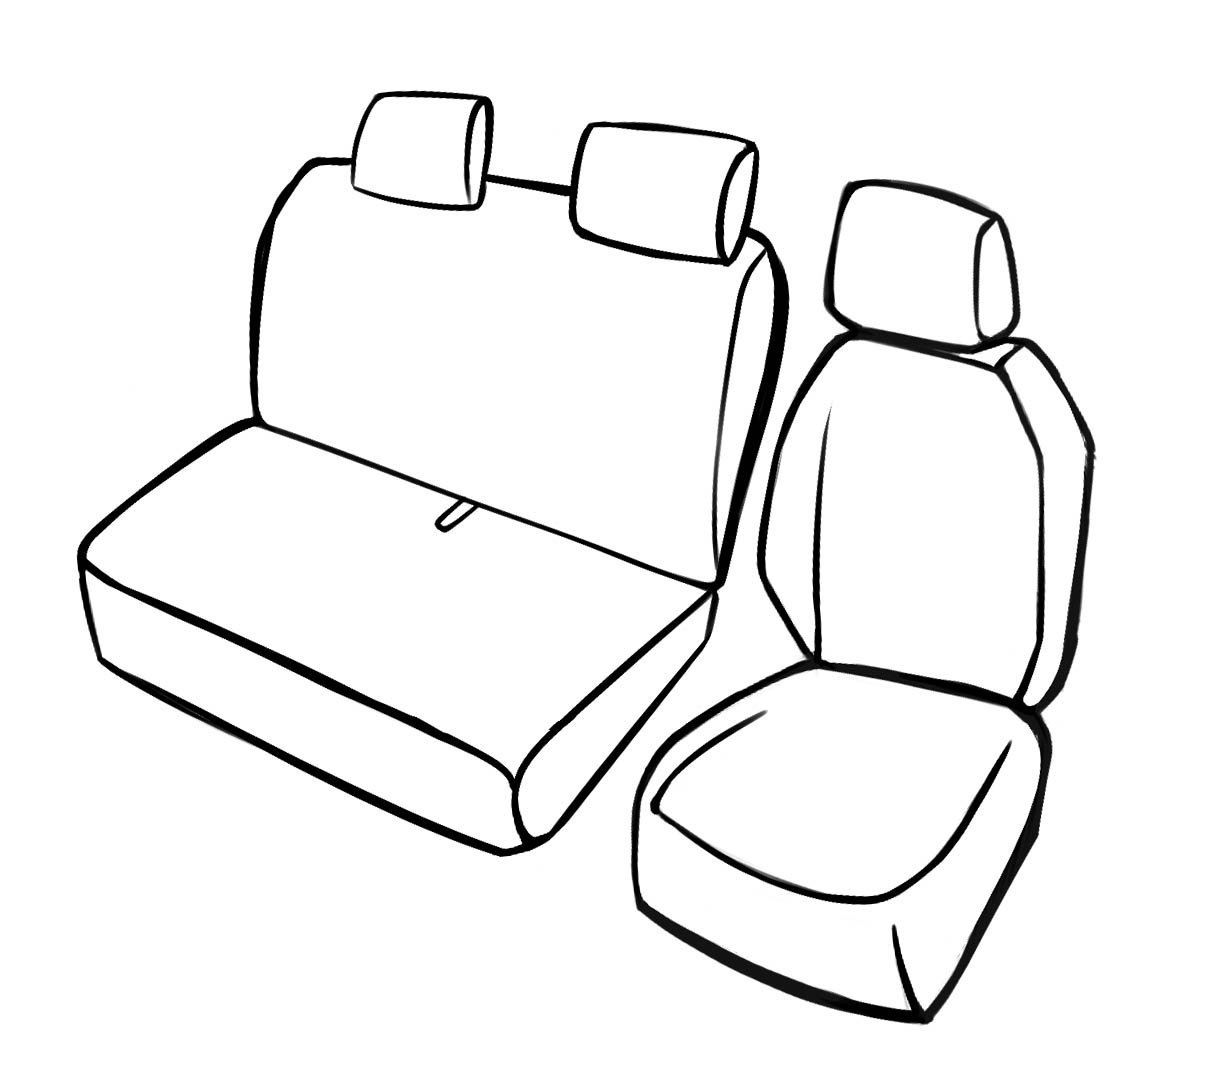 Premium Seat Cover for Citroen Berlingo 06/2018-Today, 1 single seat cover front, 1 double bench cover